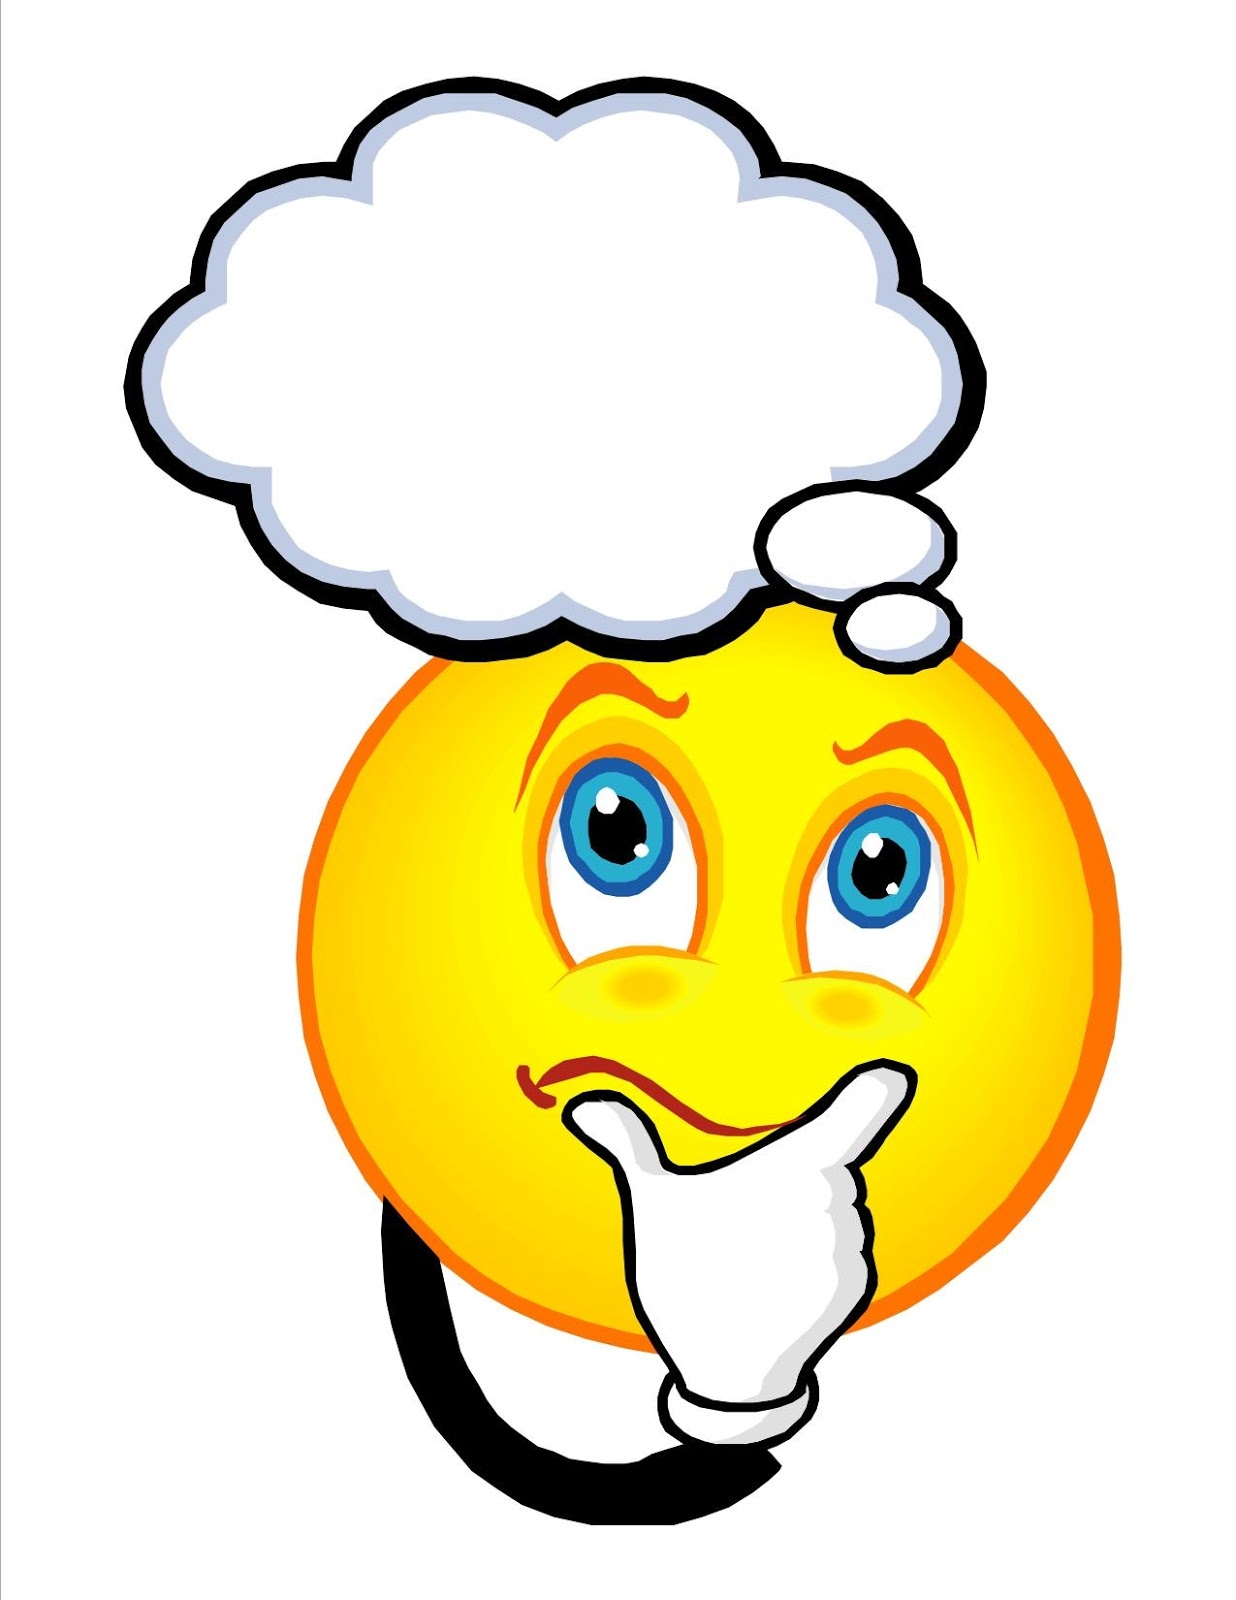 Free Thinking Brain Cliparts, Download Free Clip Art, Free.